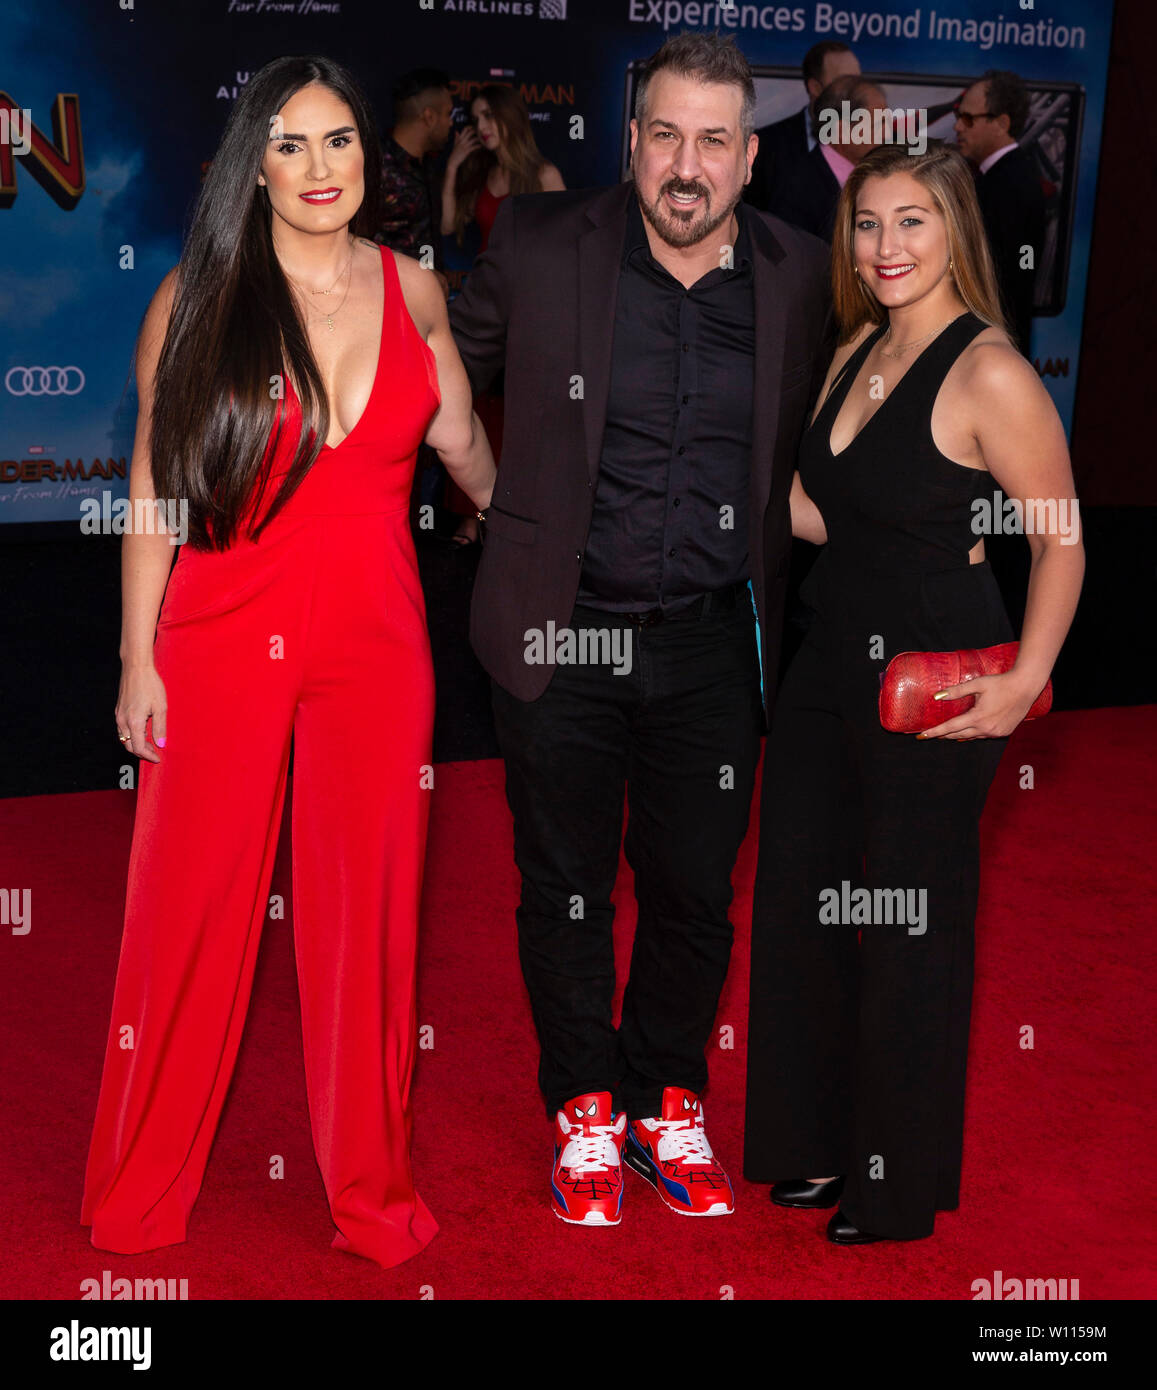 Los Angeles, CA - June 26, 2019: Kelly Baldwin, Joey Fatone and guest attend the premiere of Sony Pictures "Spider-Man Far From Home" held at TCL Chin Stock Photo